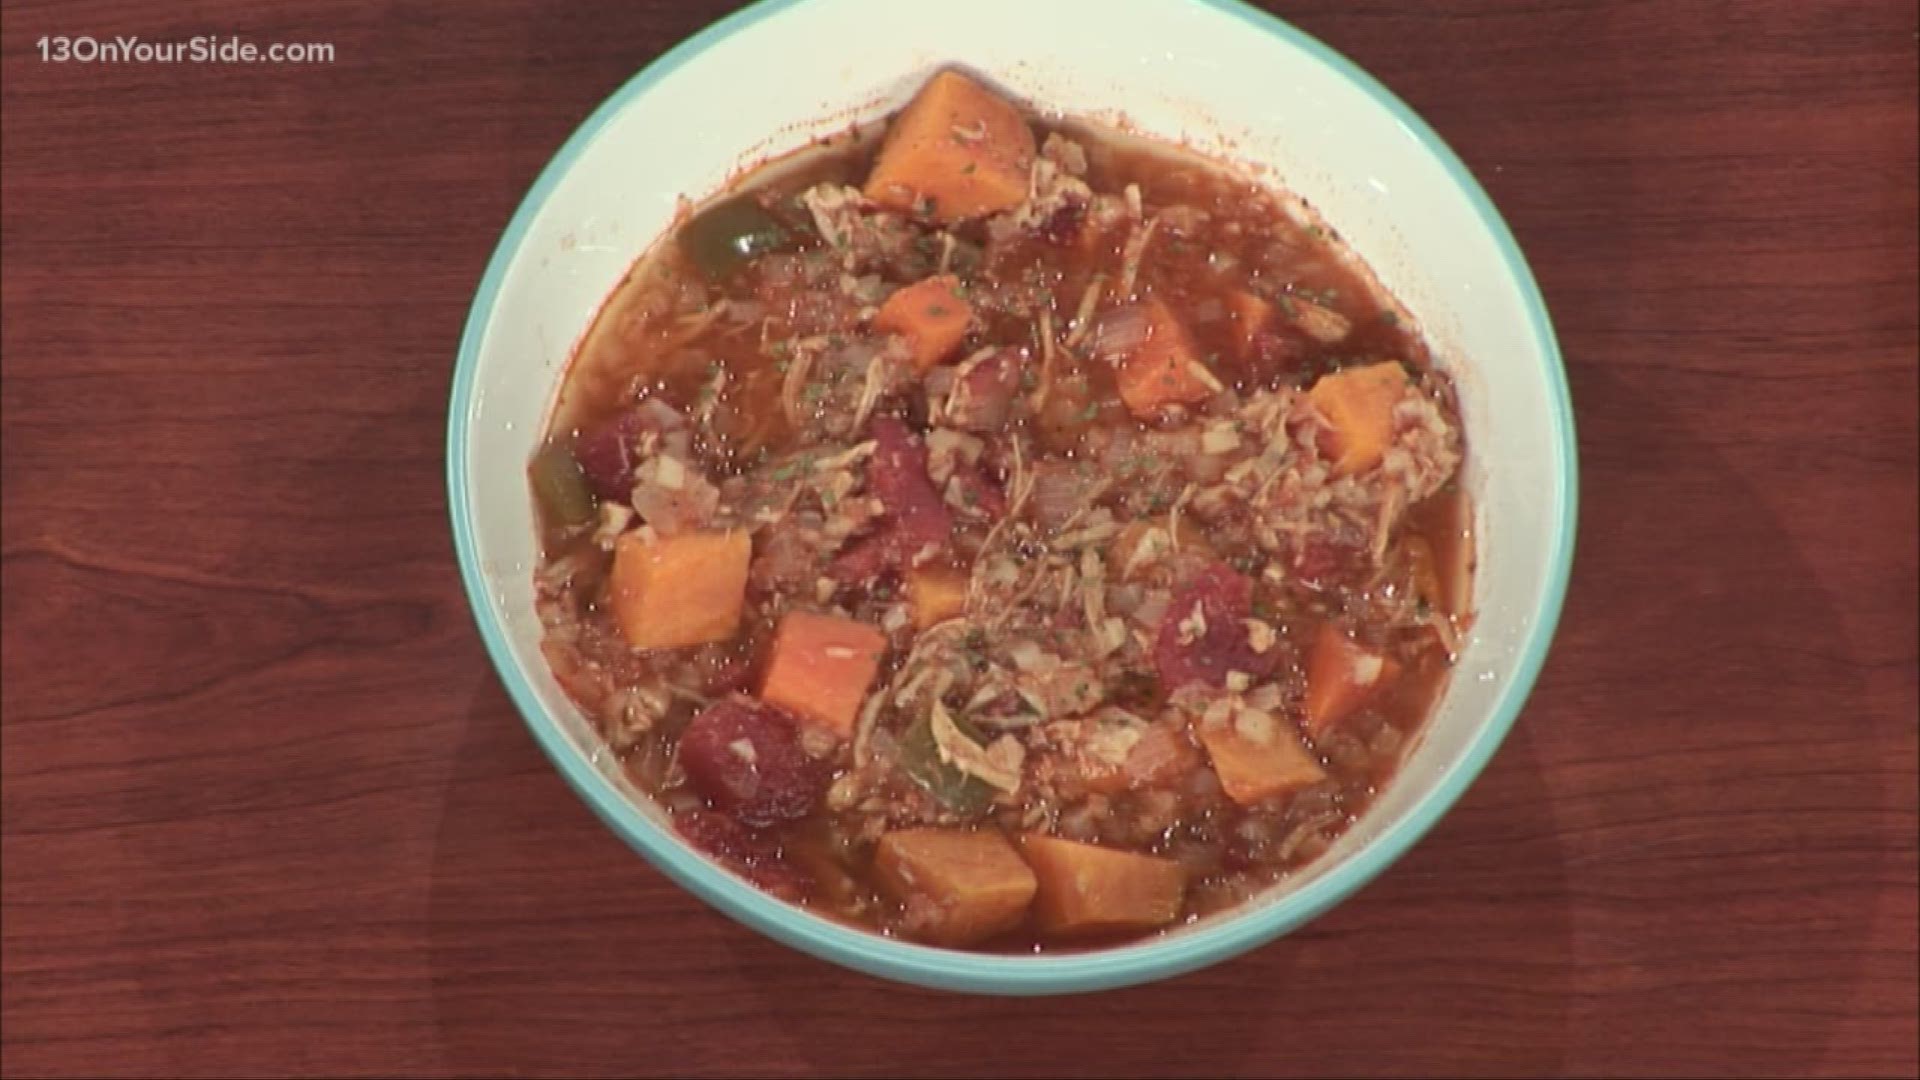 For this On the Menu segment, Registered Dietitian Rebecca Serra from Mercy Health is sharing some healthy, delicious, warm chili recipes to kick off your fall.